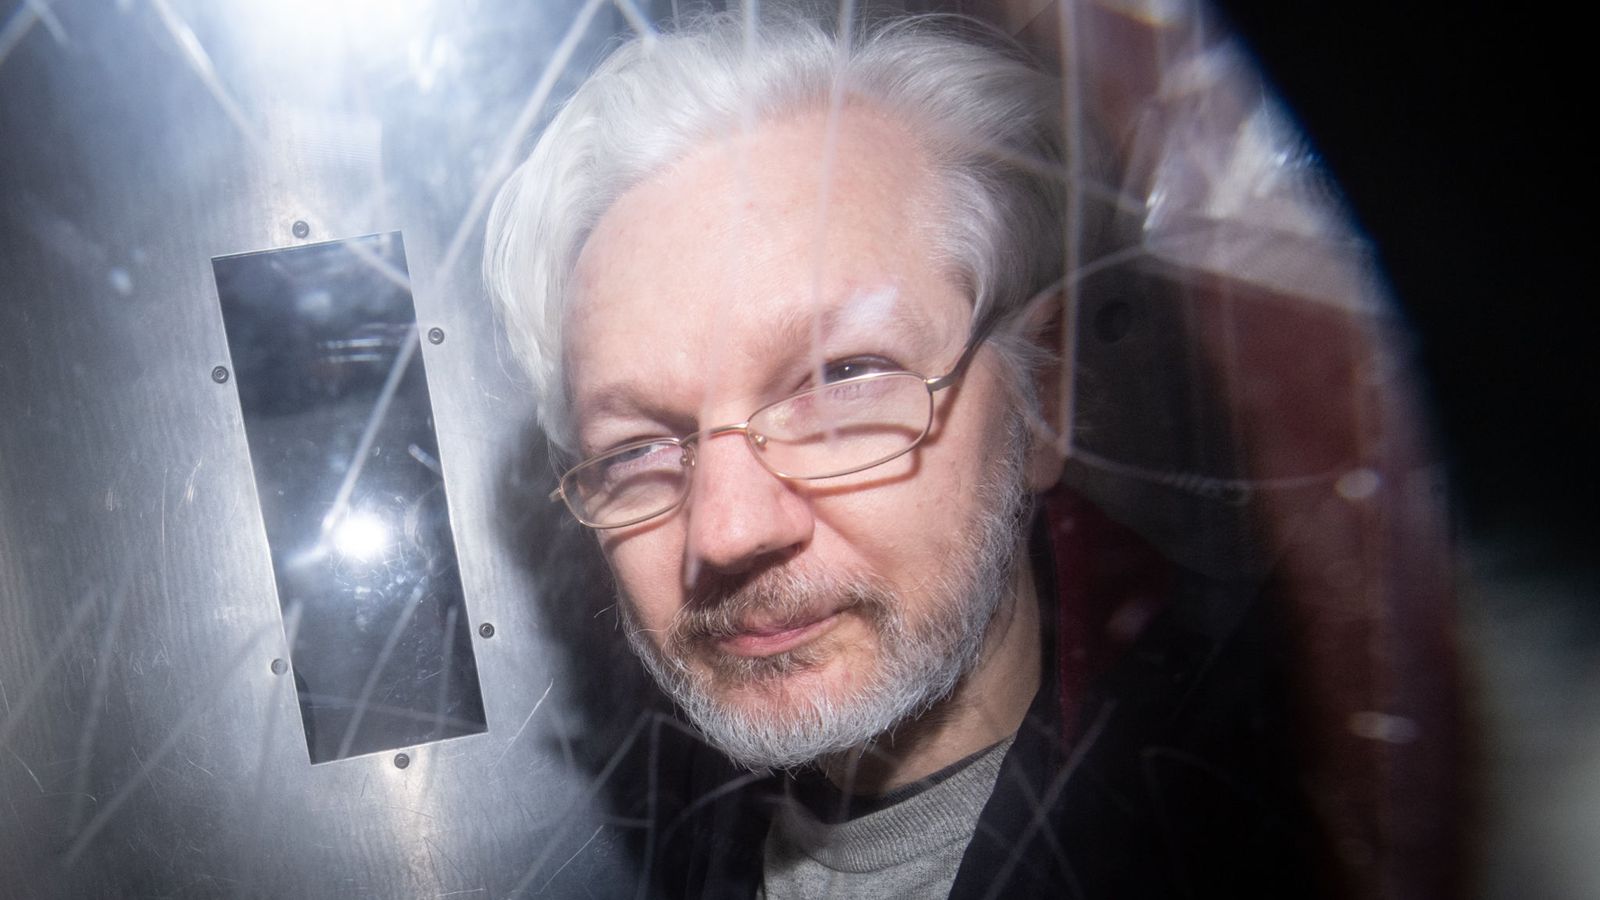 Over 100 Doctors Worry Assange May Die in UK Prison Having ‘Effectively Been Tortured to Death’